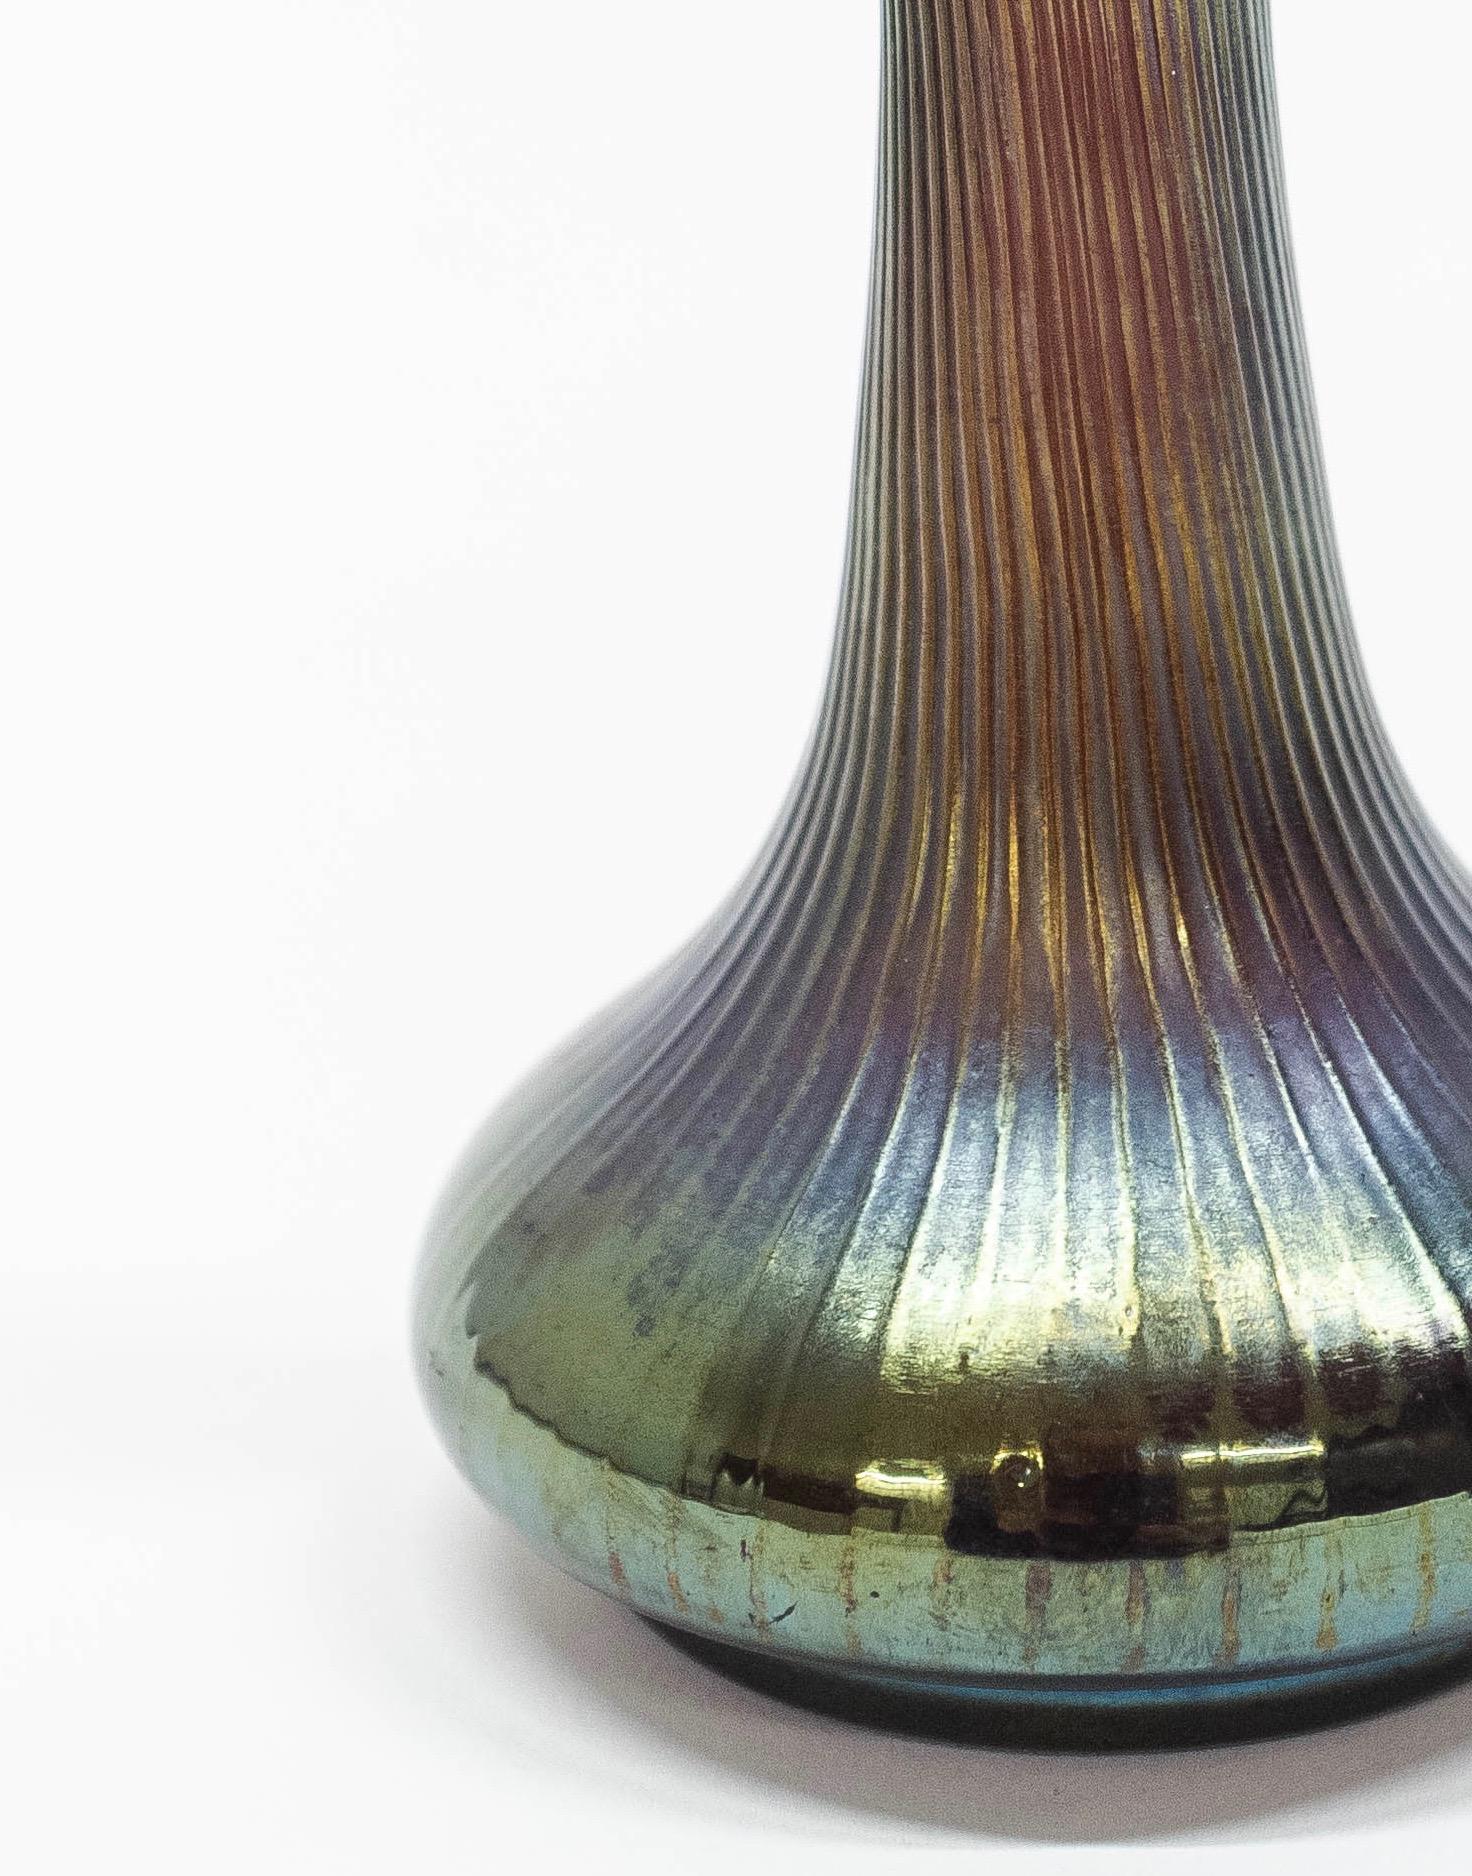 Austrian Art Deco vase from 1920s with iridescent sheen and linear design.